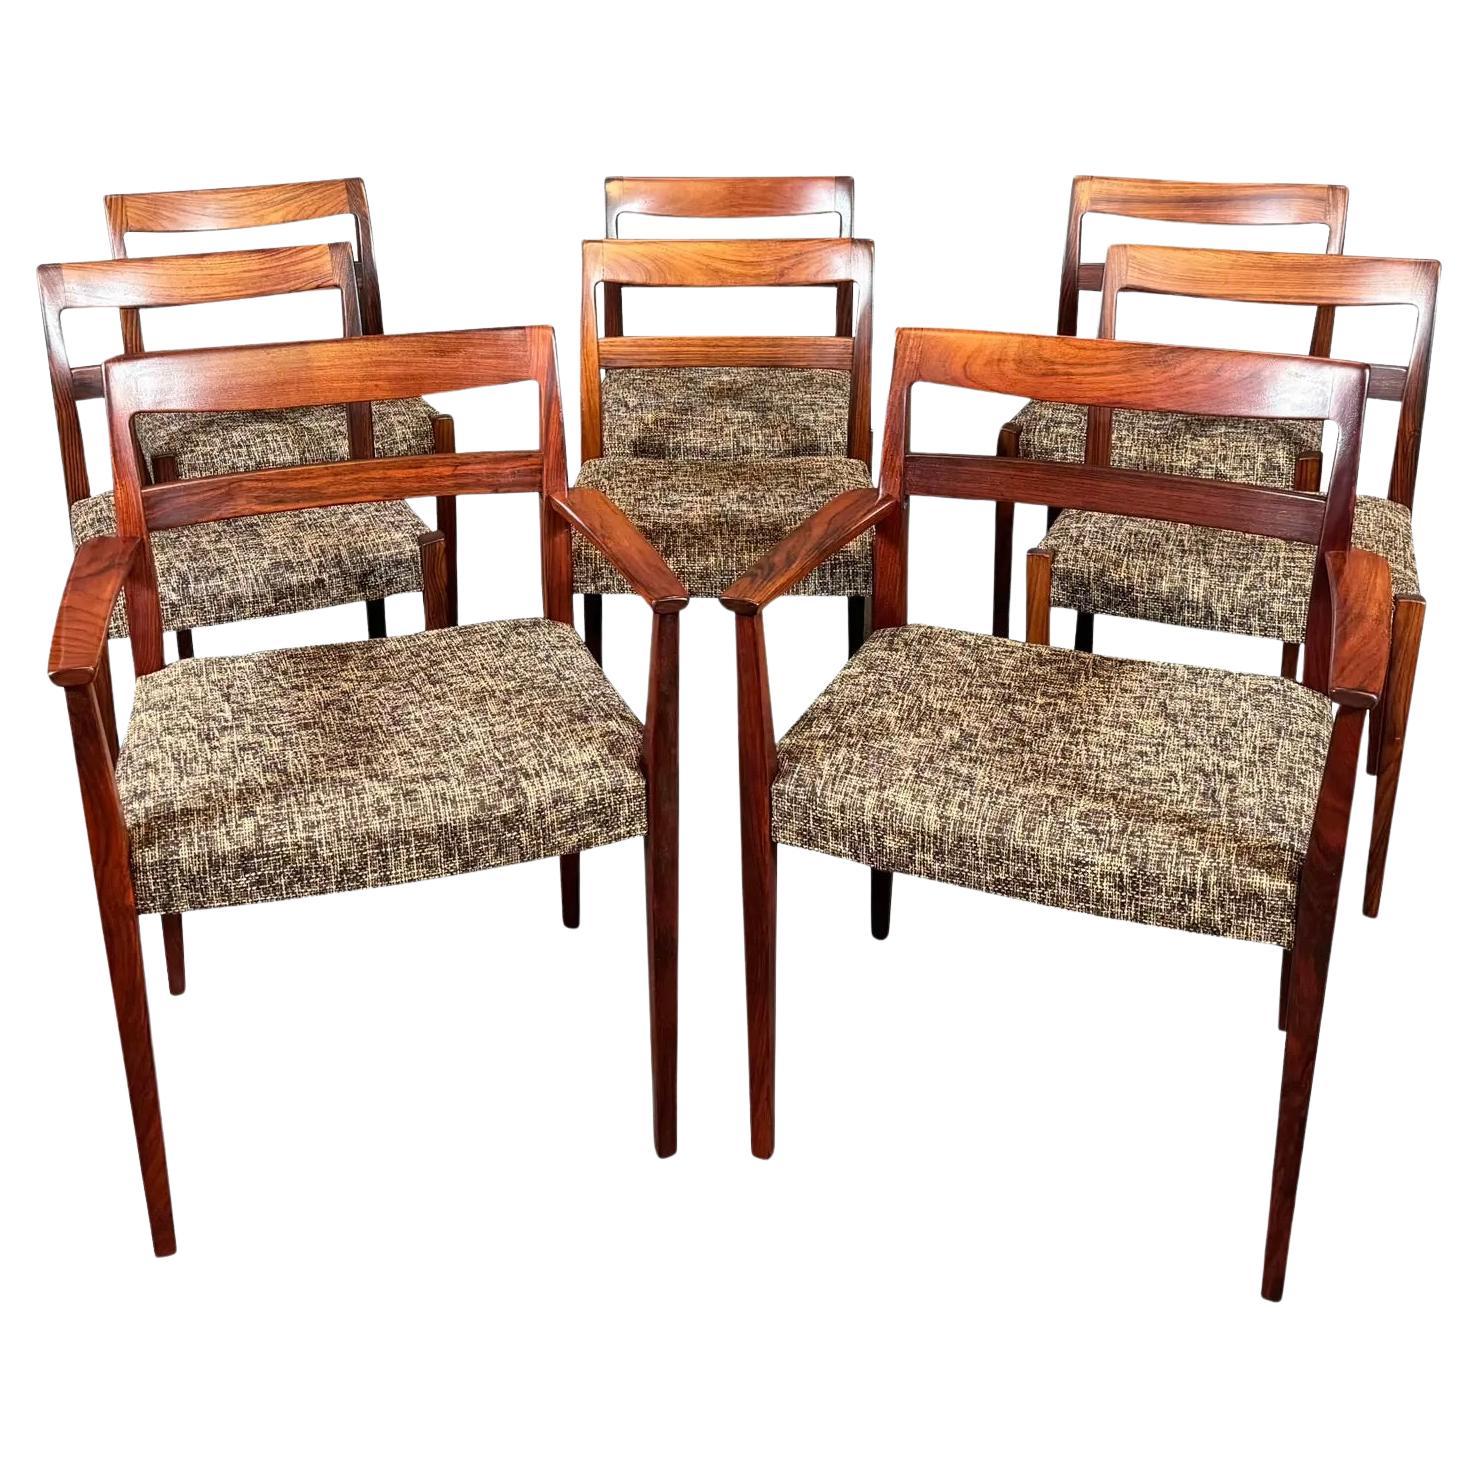  8 Vintage Danish Mid Century Rosewood Dining Chairs "Garmin" by Nils Jonsson For Sale